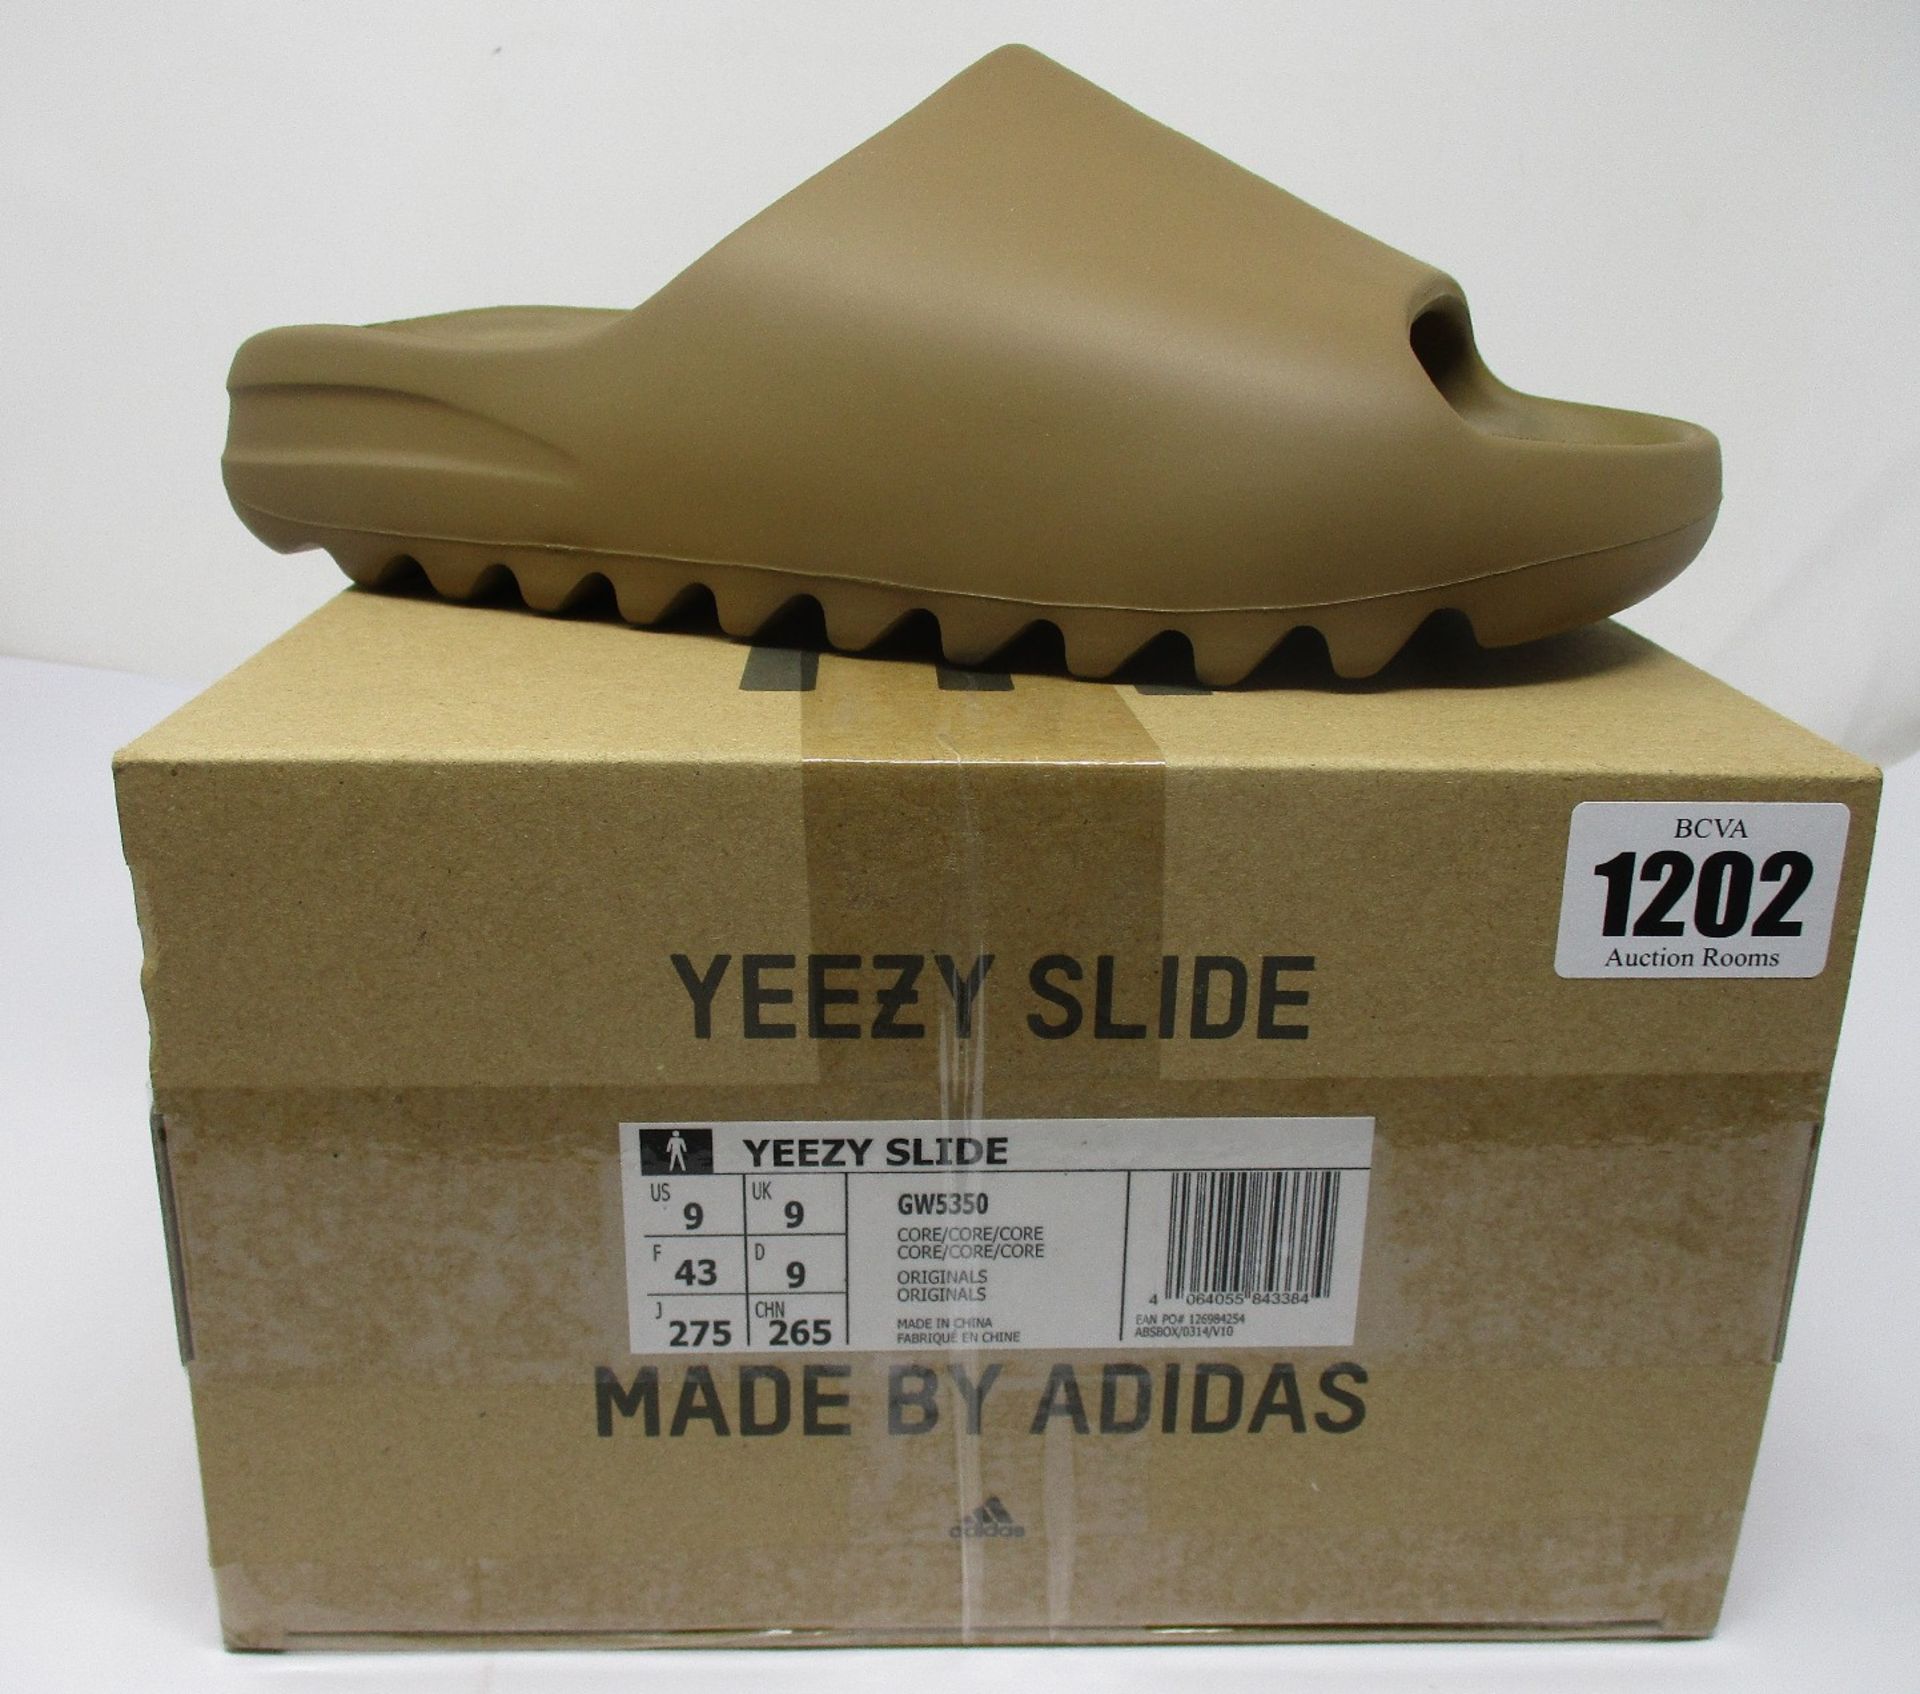 A pair of as new Adidas Yeezy Slide (UK 9).